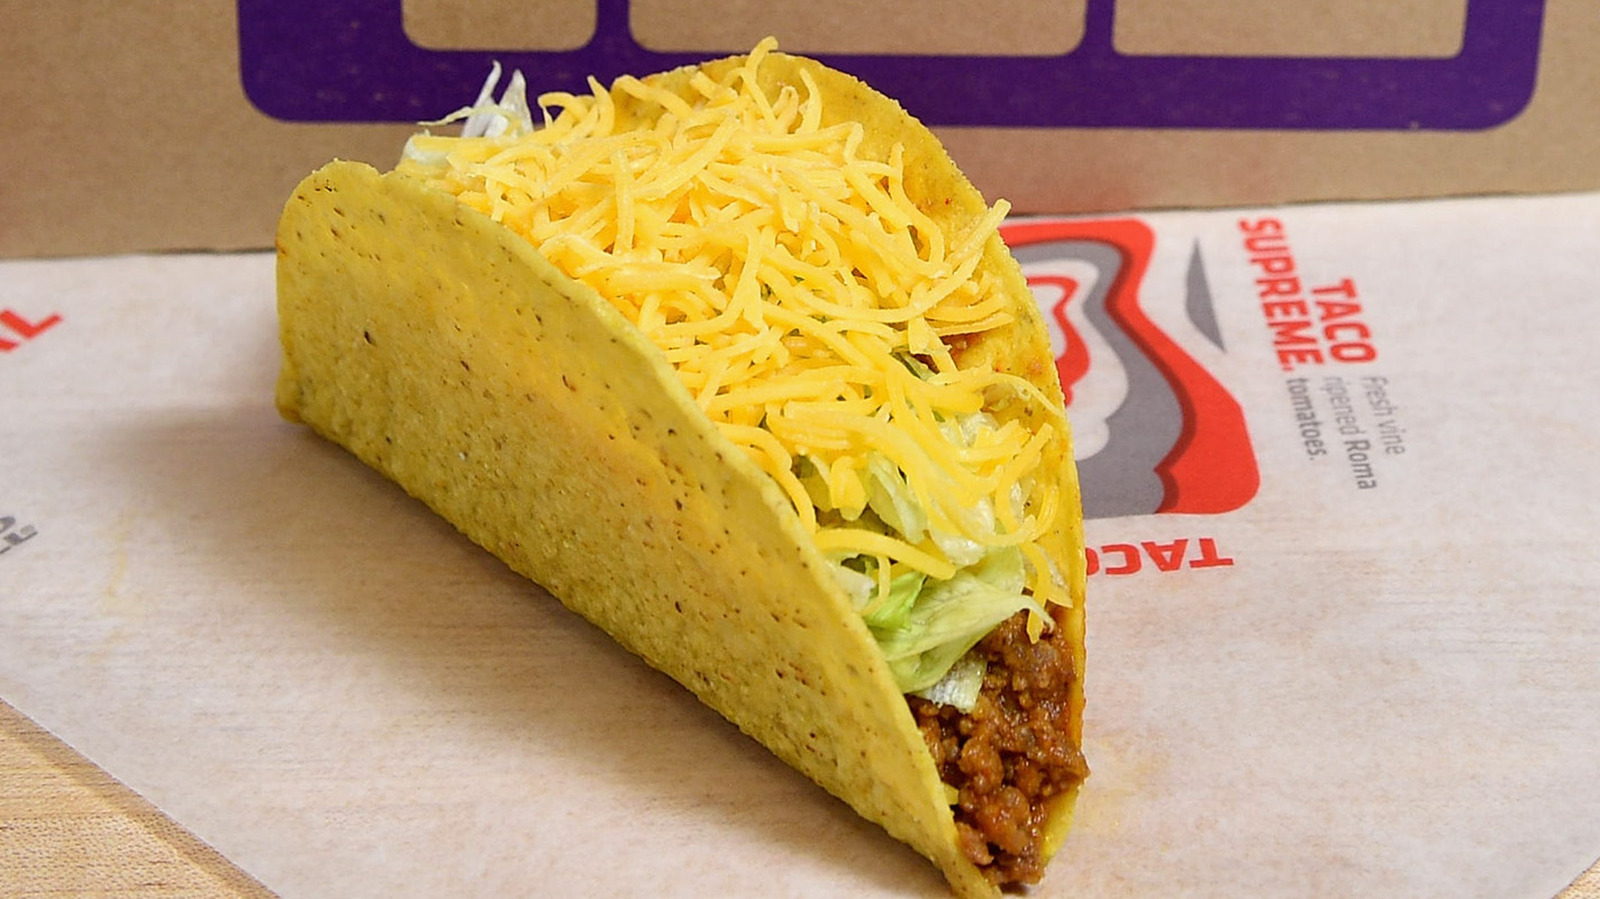 How Much is a Crunchy Taco At Taco Bell? - Bricks Chicago